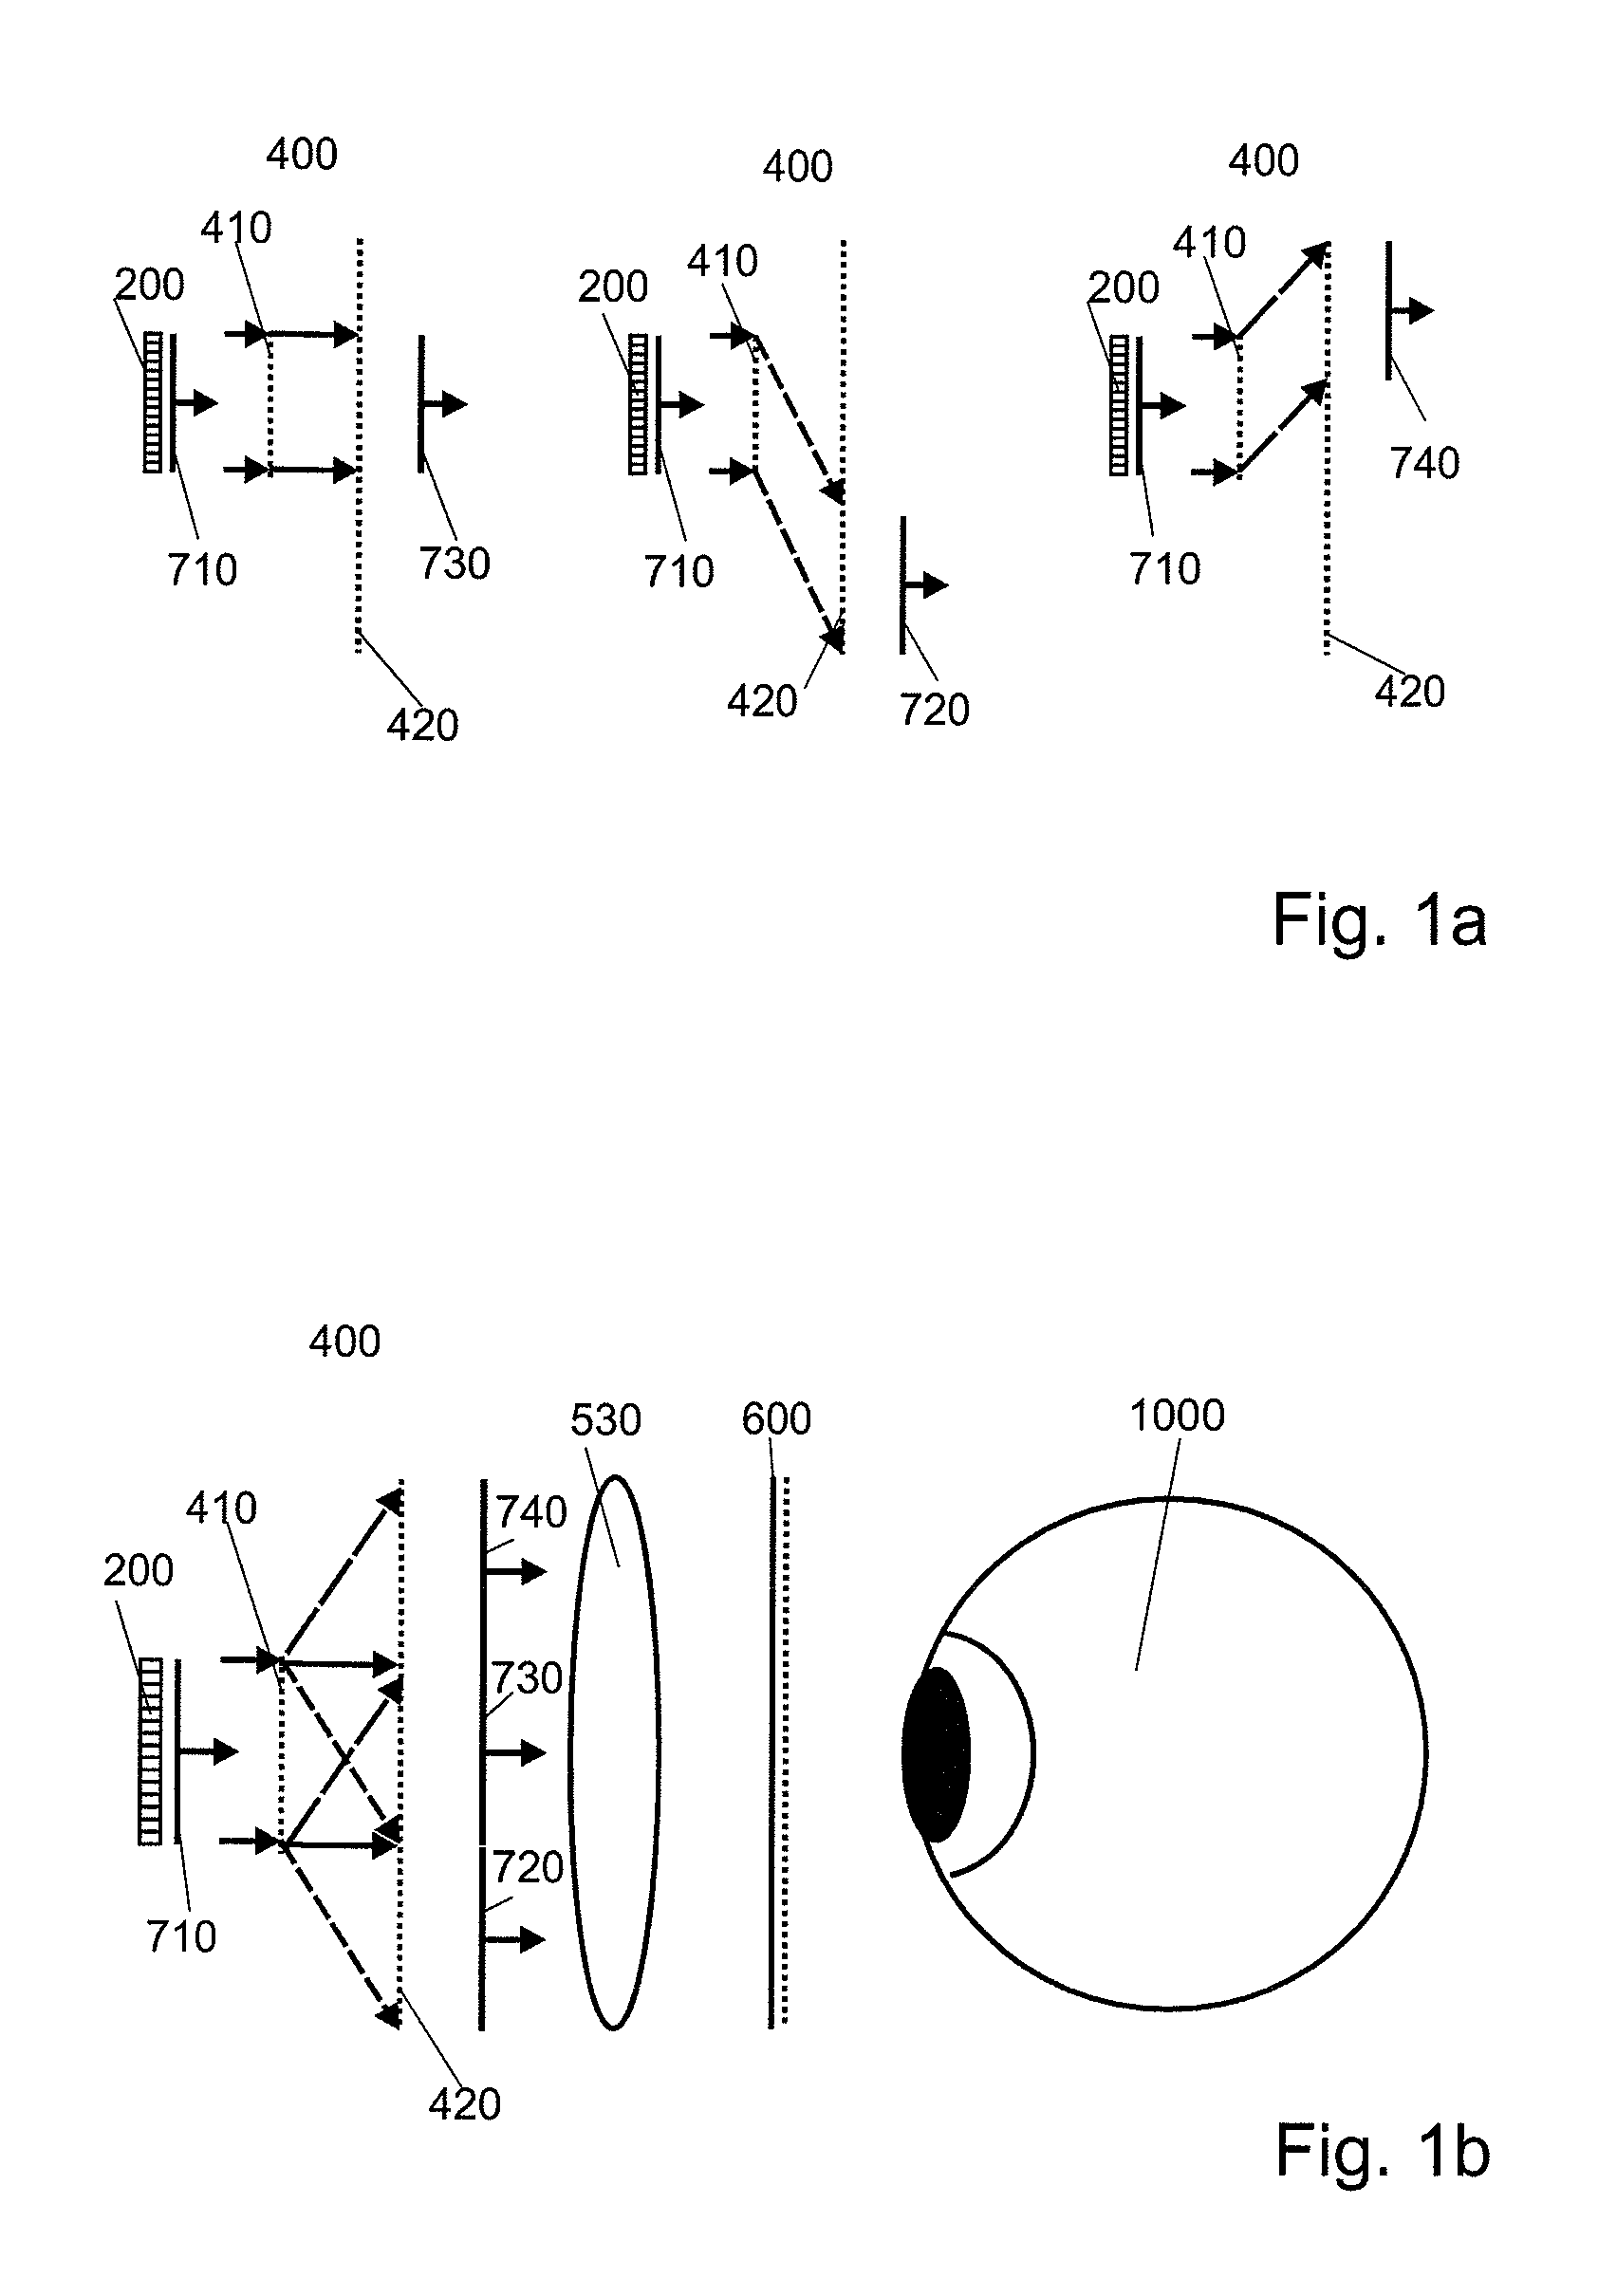 Display device, in particular a head-mounted display, based on temporal and spatial multiplexing of hologram tiles